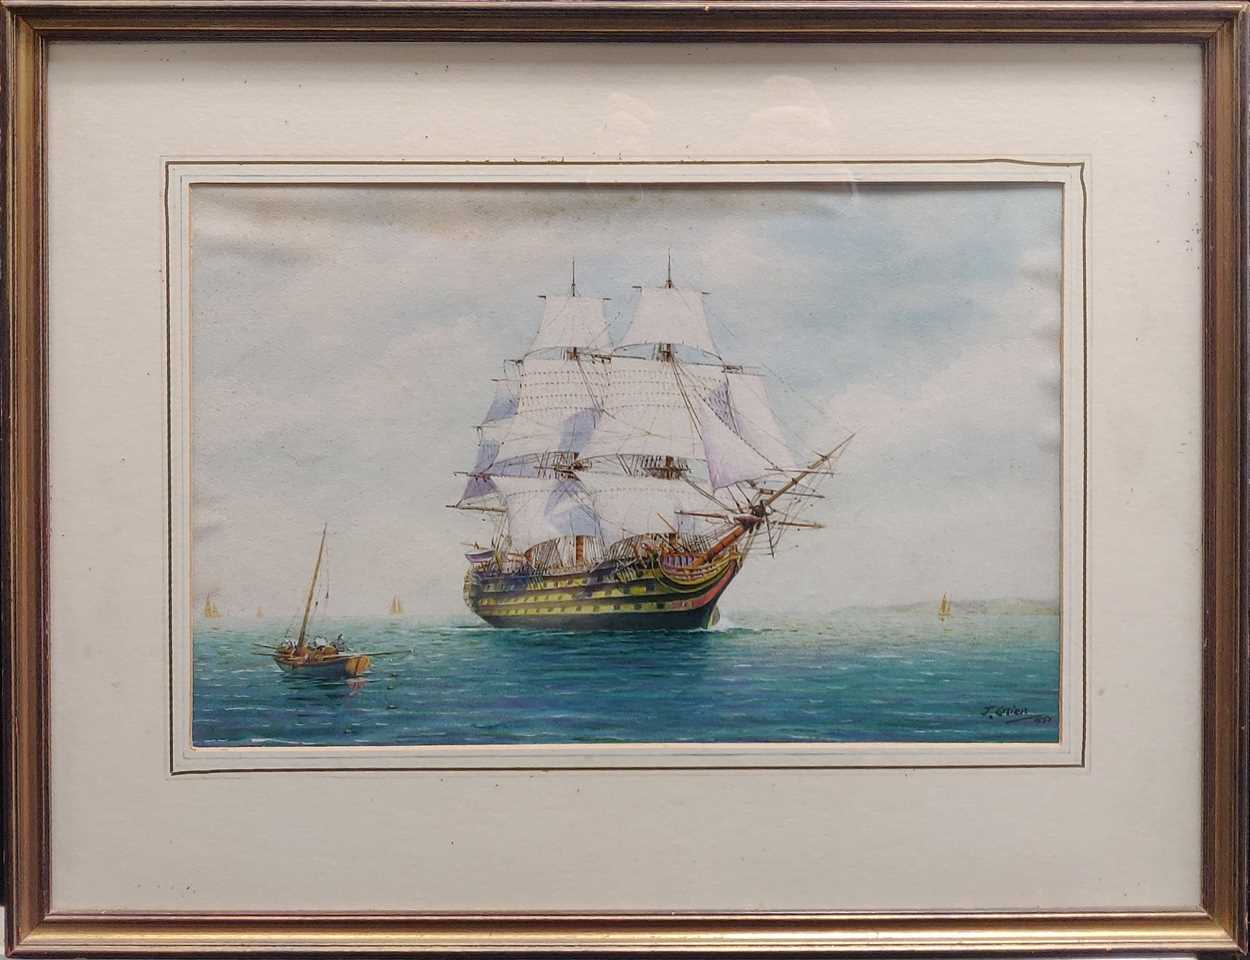 J. GrierSailing ship at sea signed and dated 'J. Grier 1857' (lower right)watercolour, pen and ink - Image 2 of 10